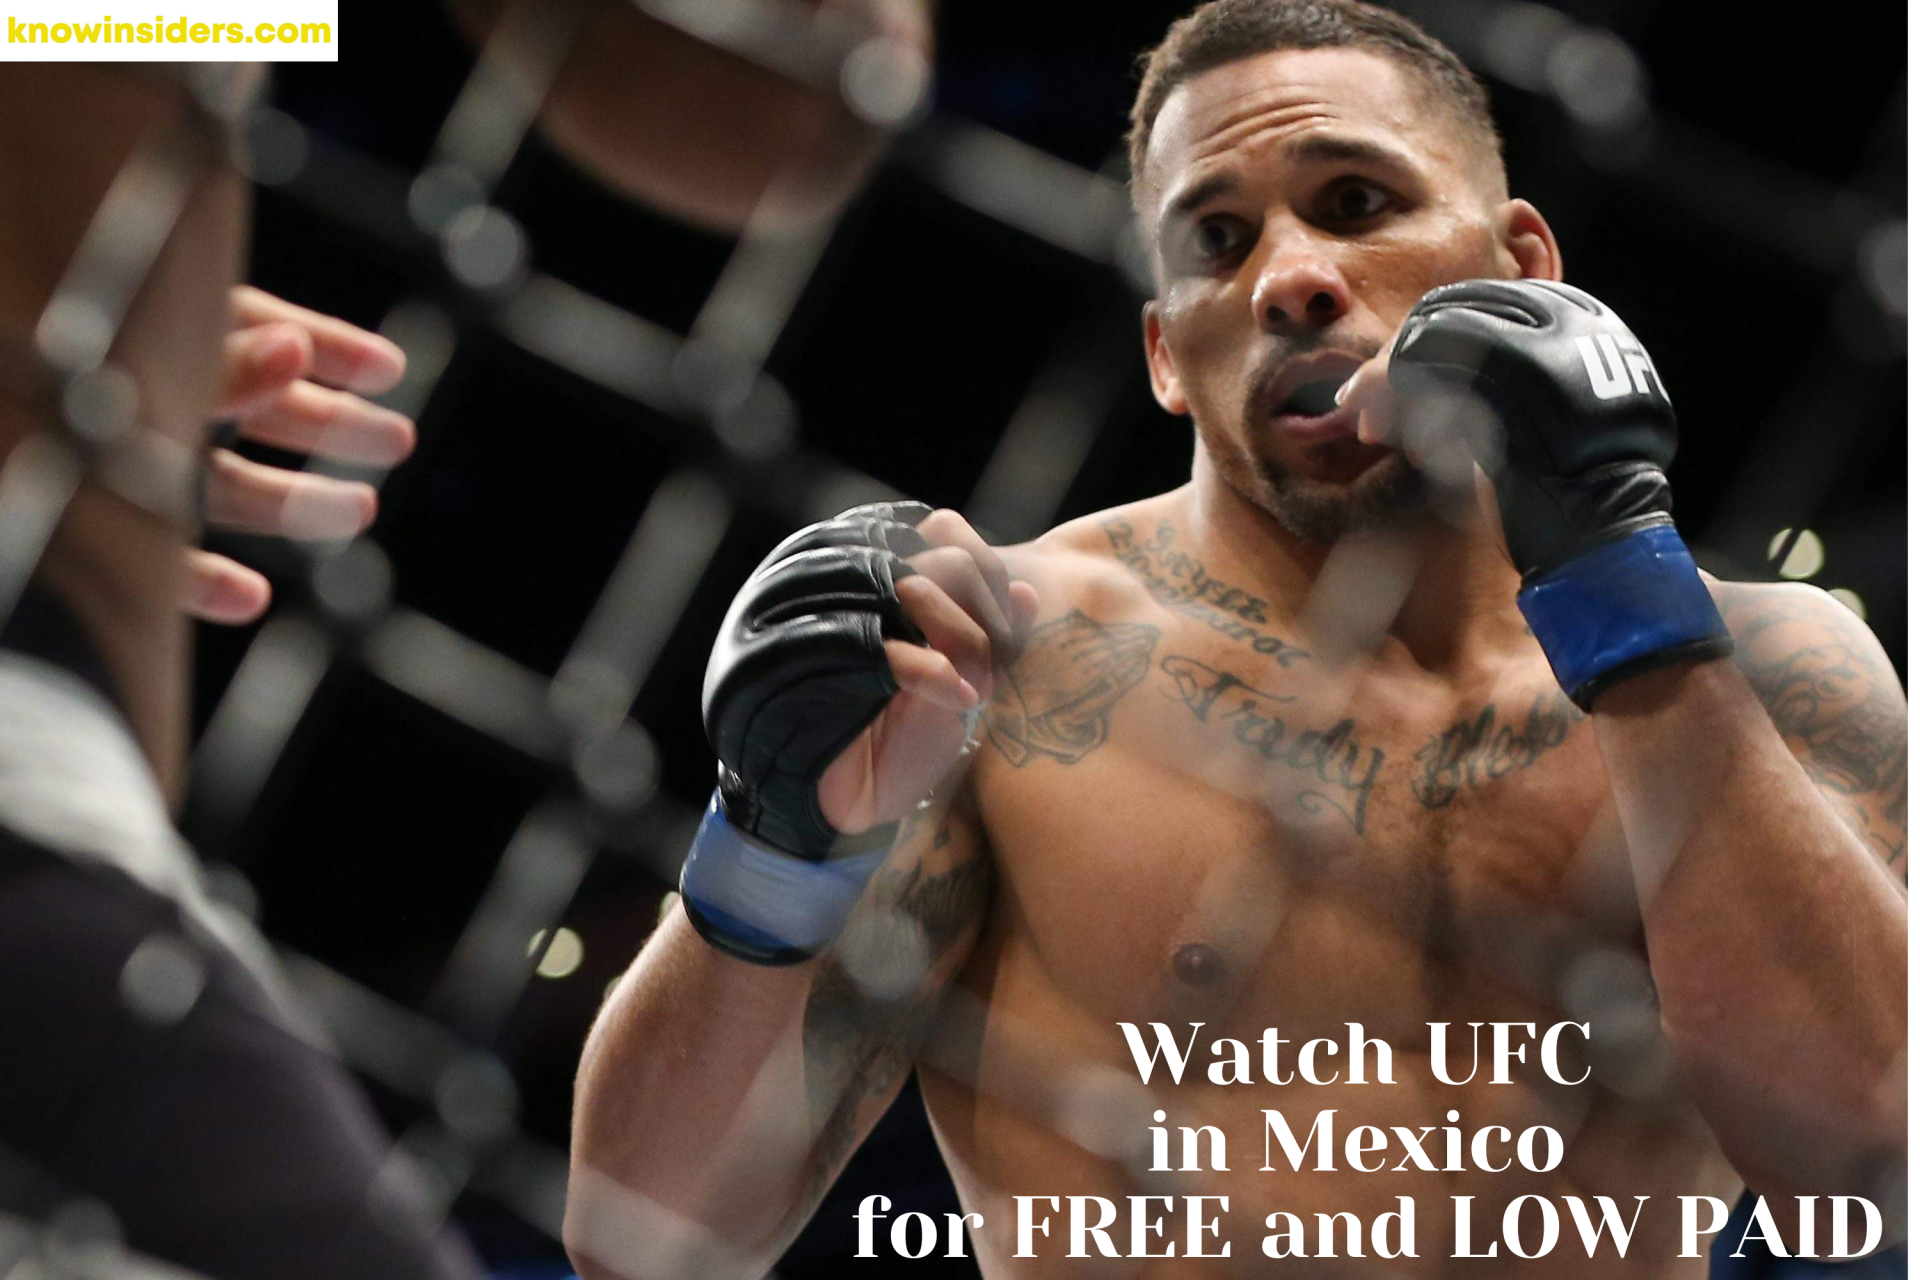 Watch UFC In Mexico for FREE and Low Paid